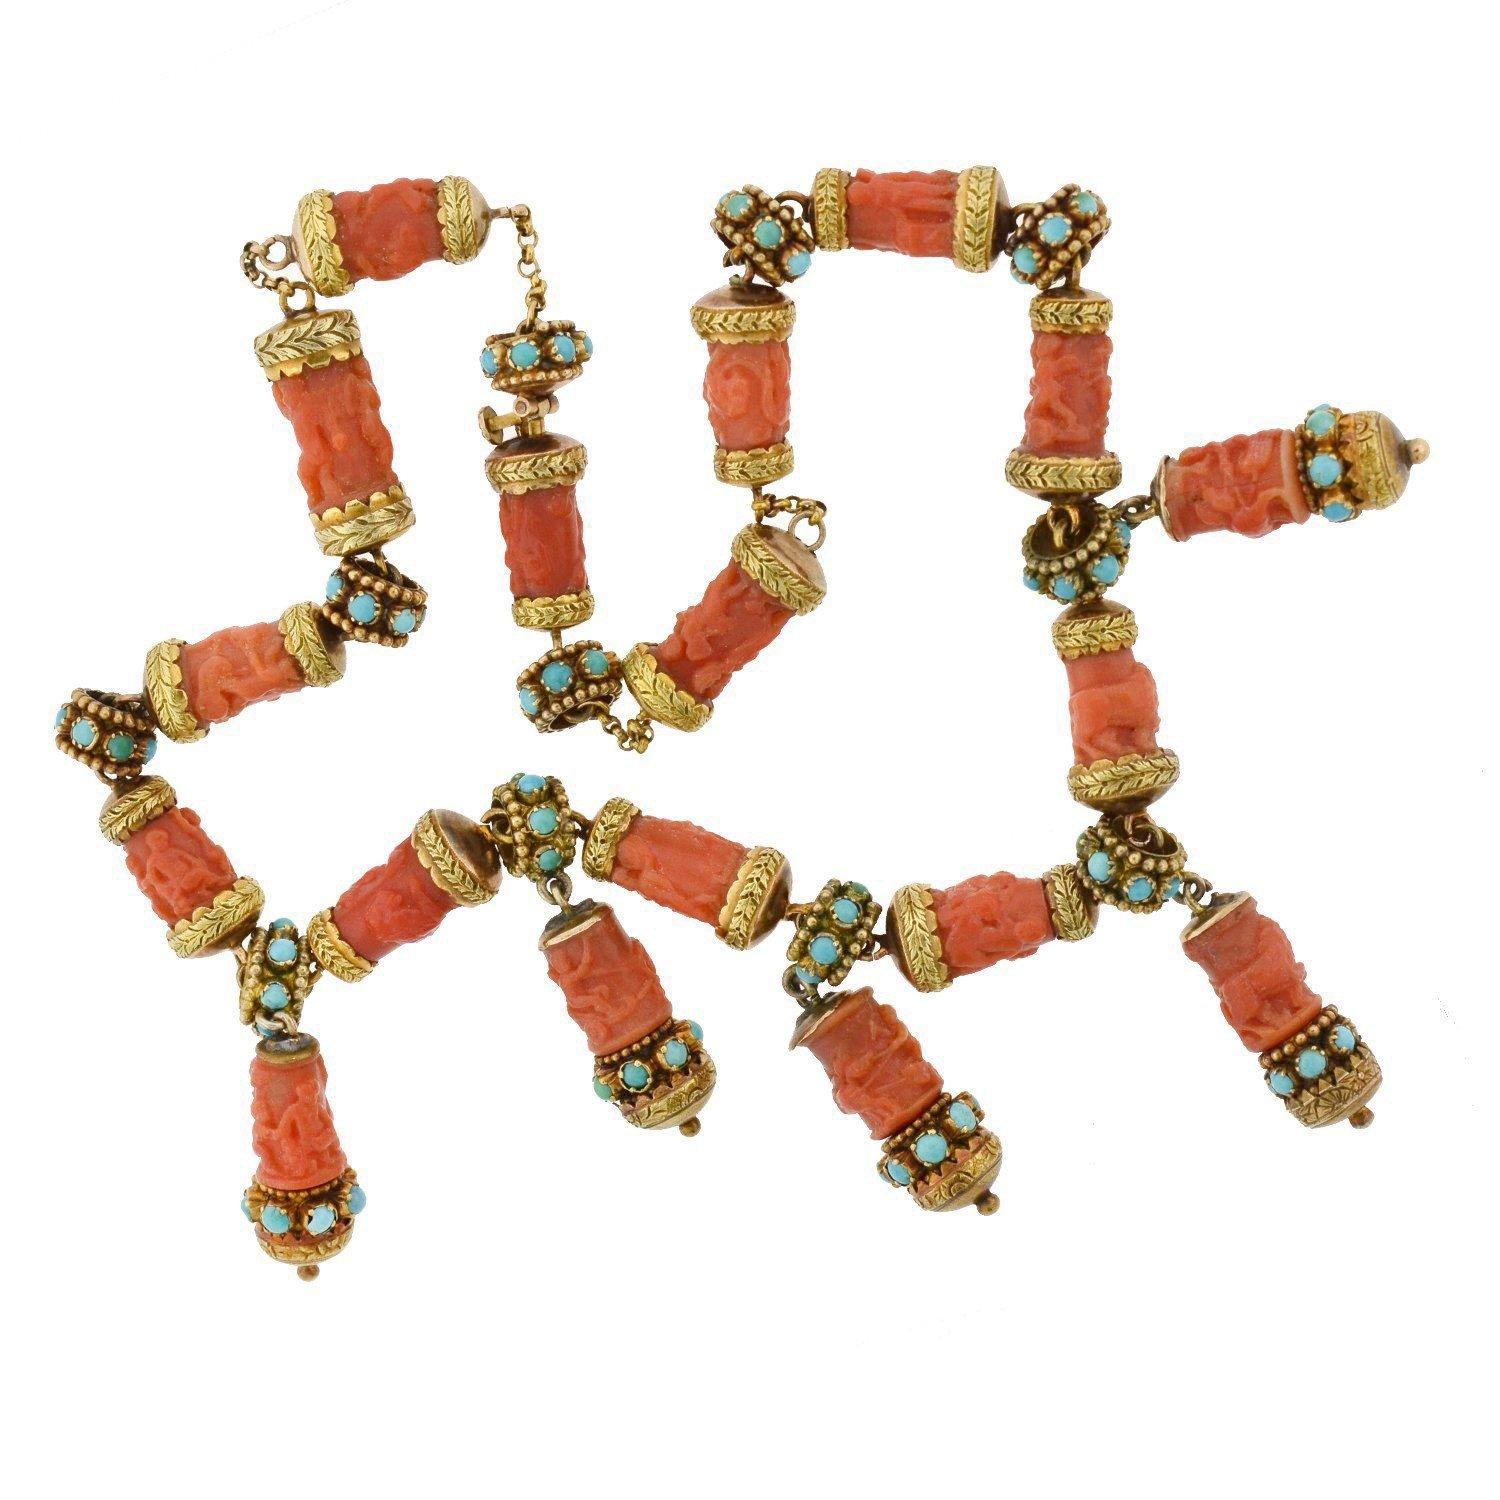 A rare and stunning coral and turquoise necklace from the Victorian (ca1880) era! This 14kt yellow gold piece features gorgeous hand-carved coral links that form a chain, with 5 links dangling from the center in a festoon-style fashion. The